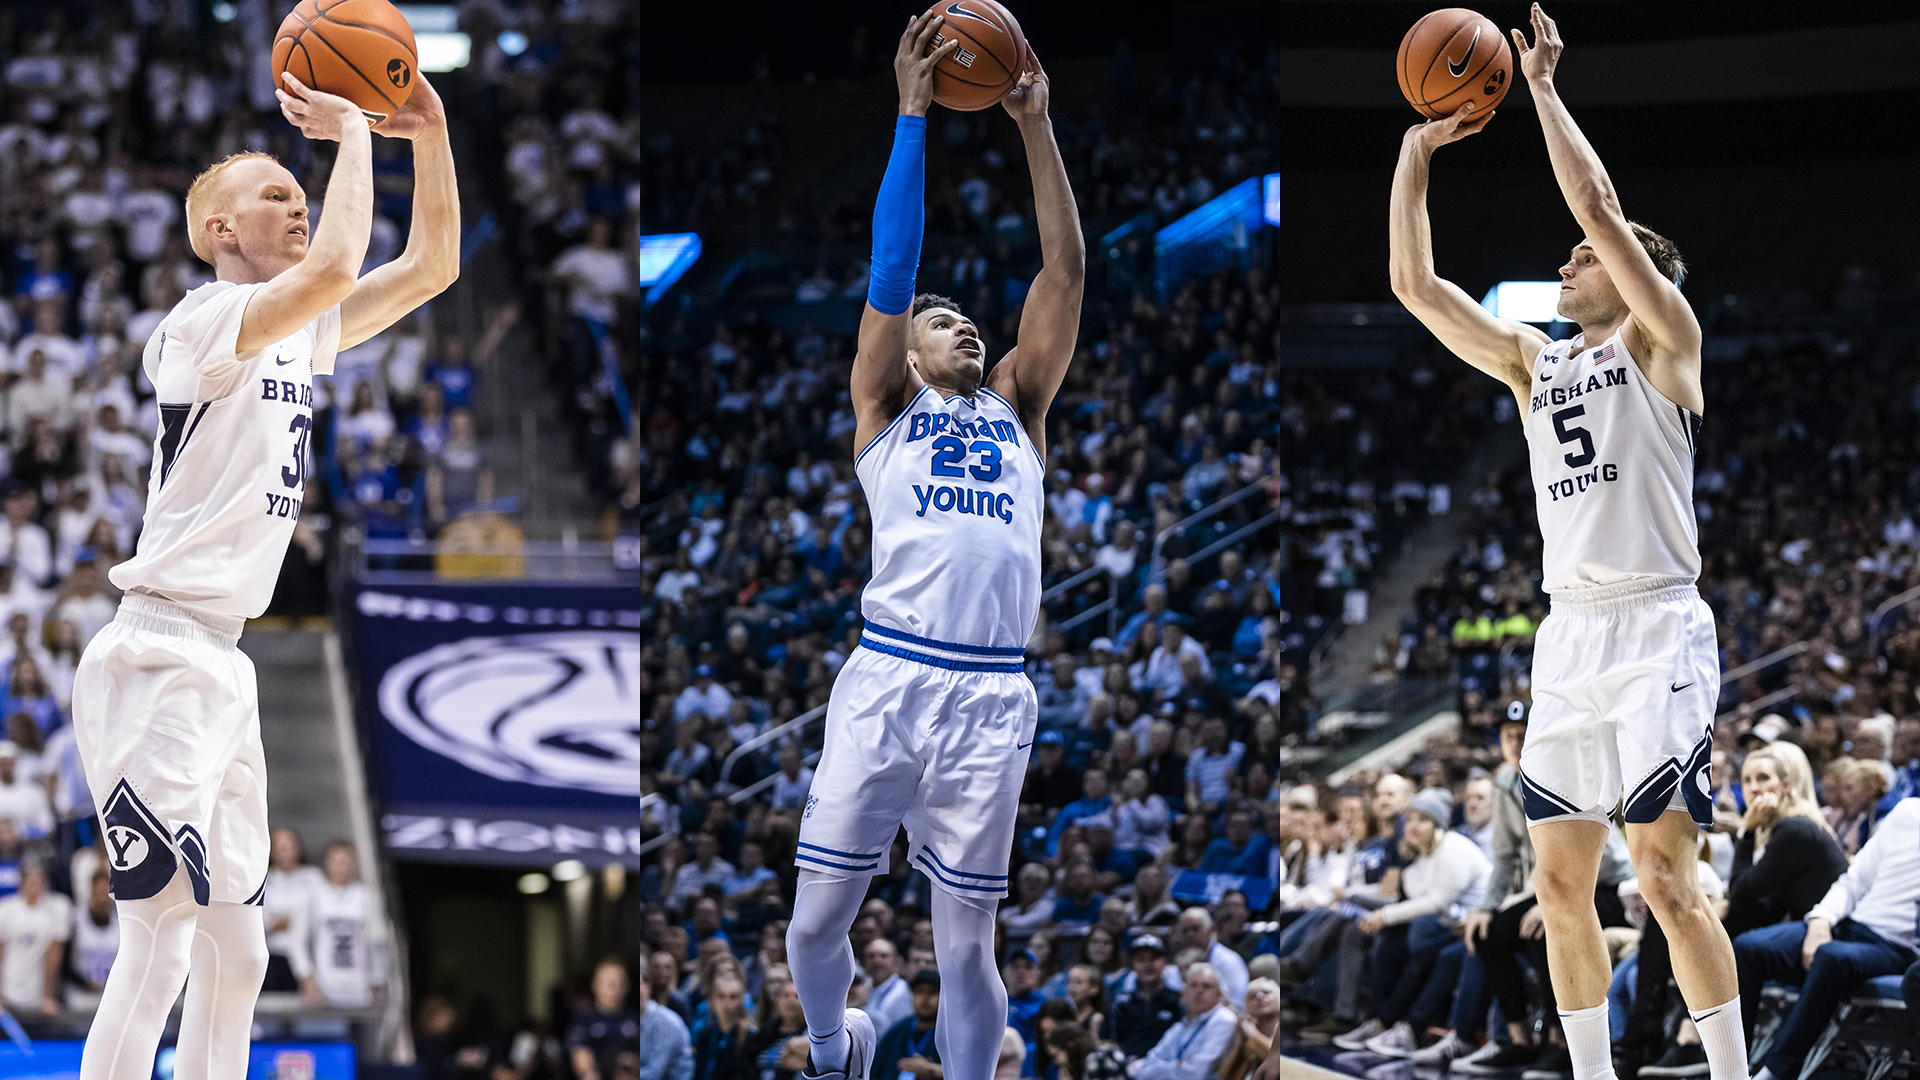 Photo collage left to right of TJ Haws shooting a basketball, Yoeli Childs dunking a ball and Jake Toolson shooting.